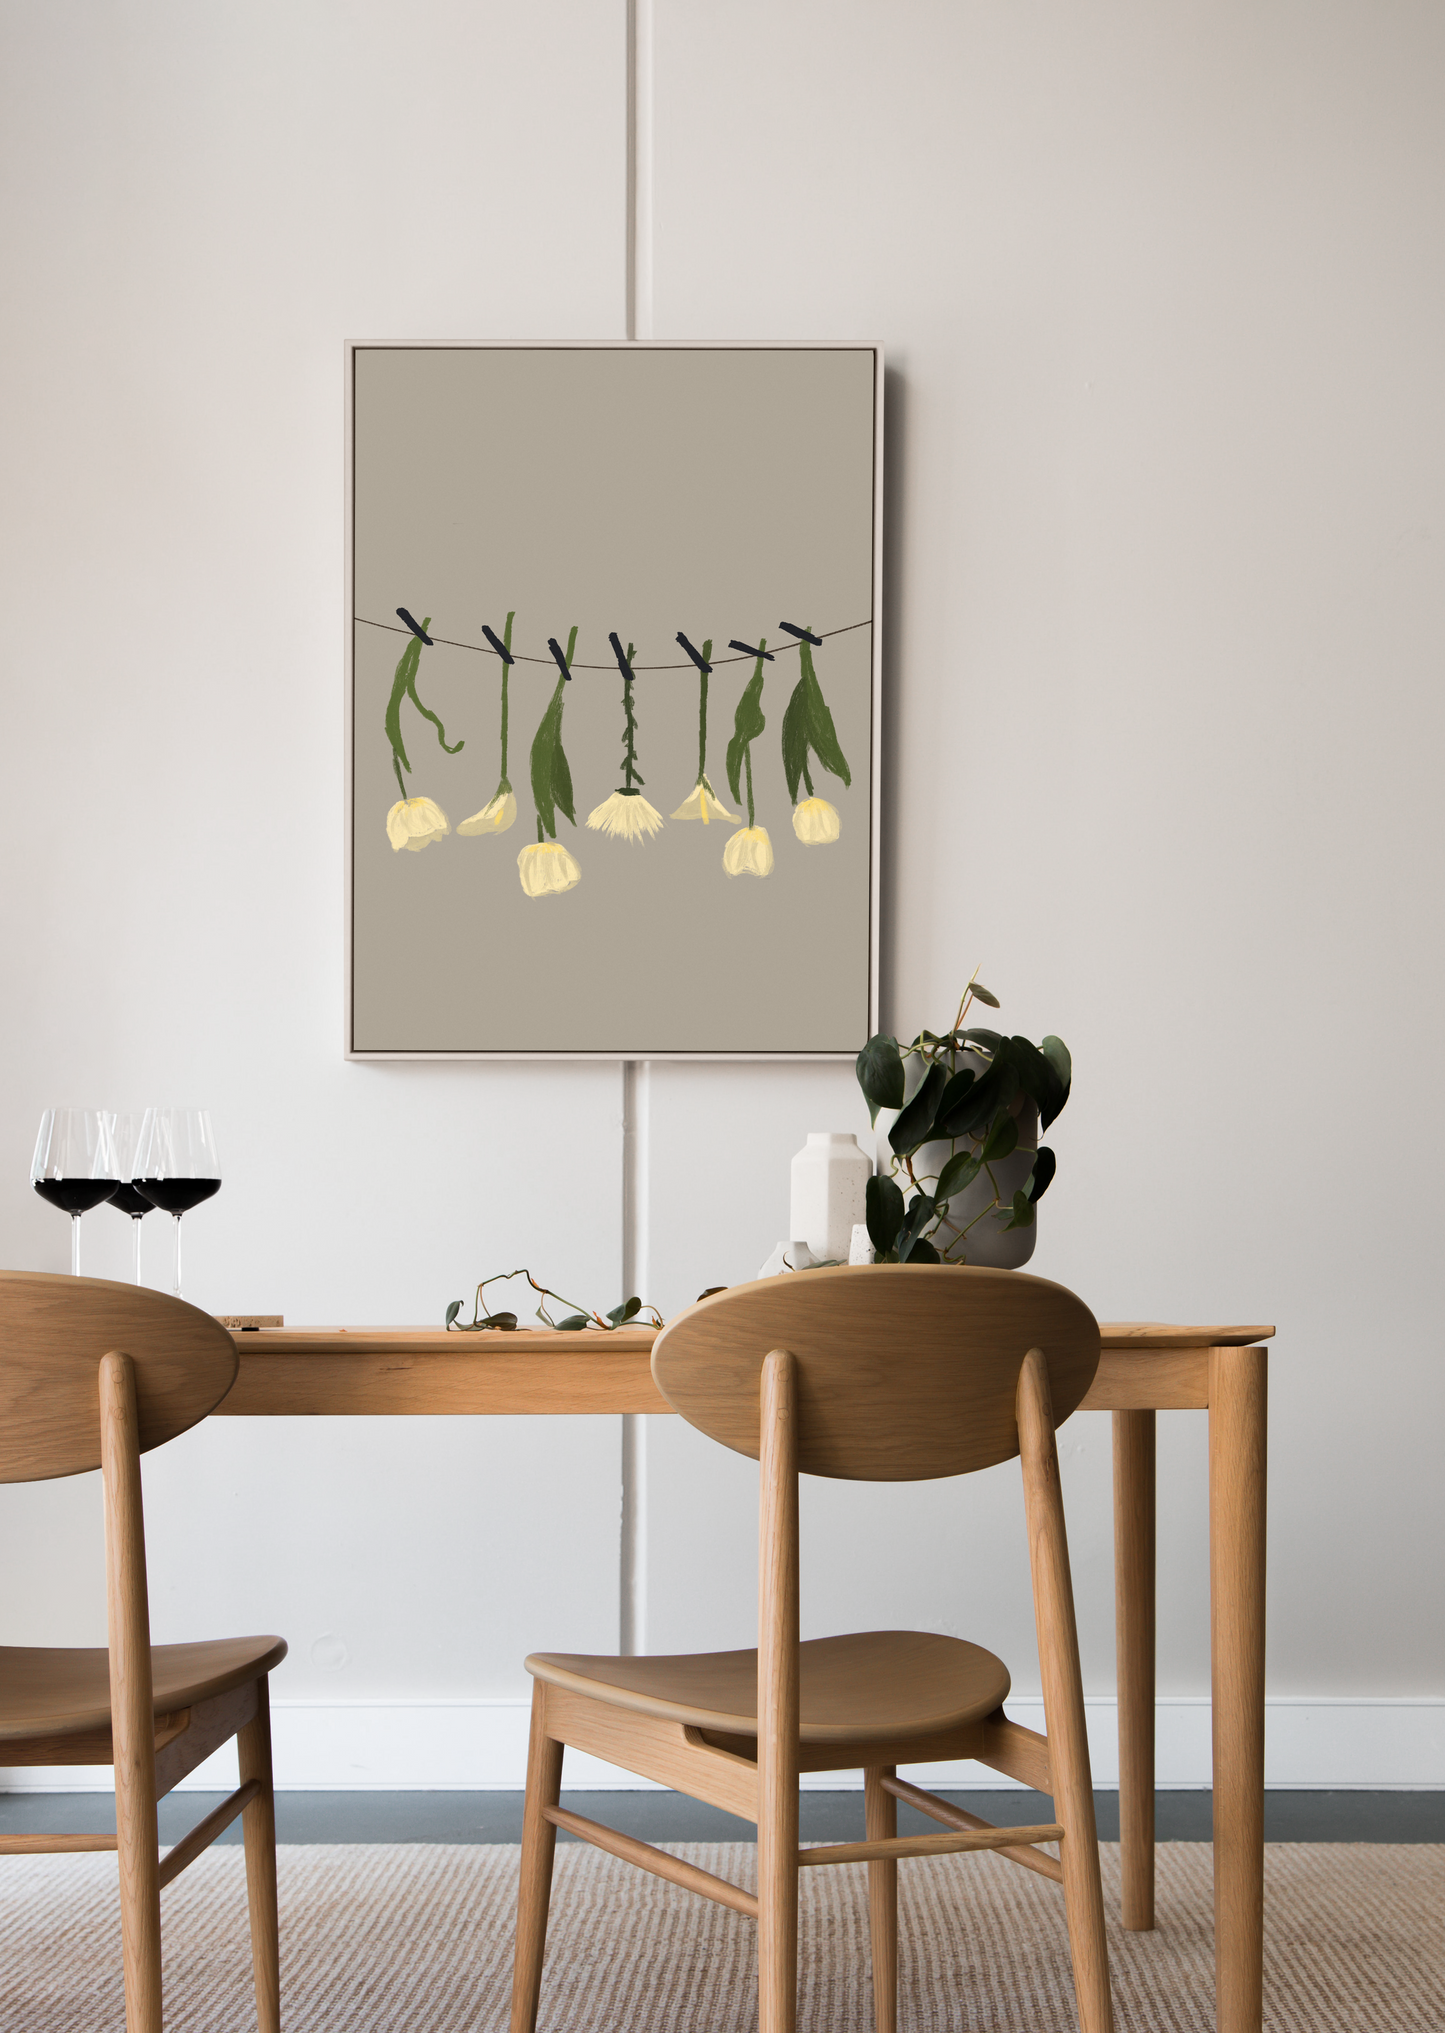 A contemporary digital painting of white blossoms strung up on a line, framed in a sleek wooden frame, accentuating a modern dining room with wine glasses on the table